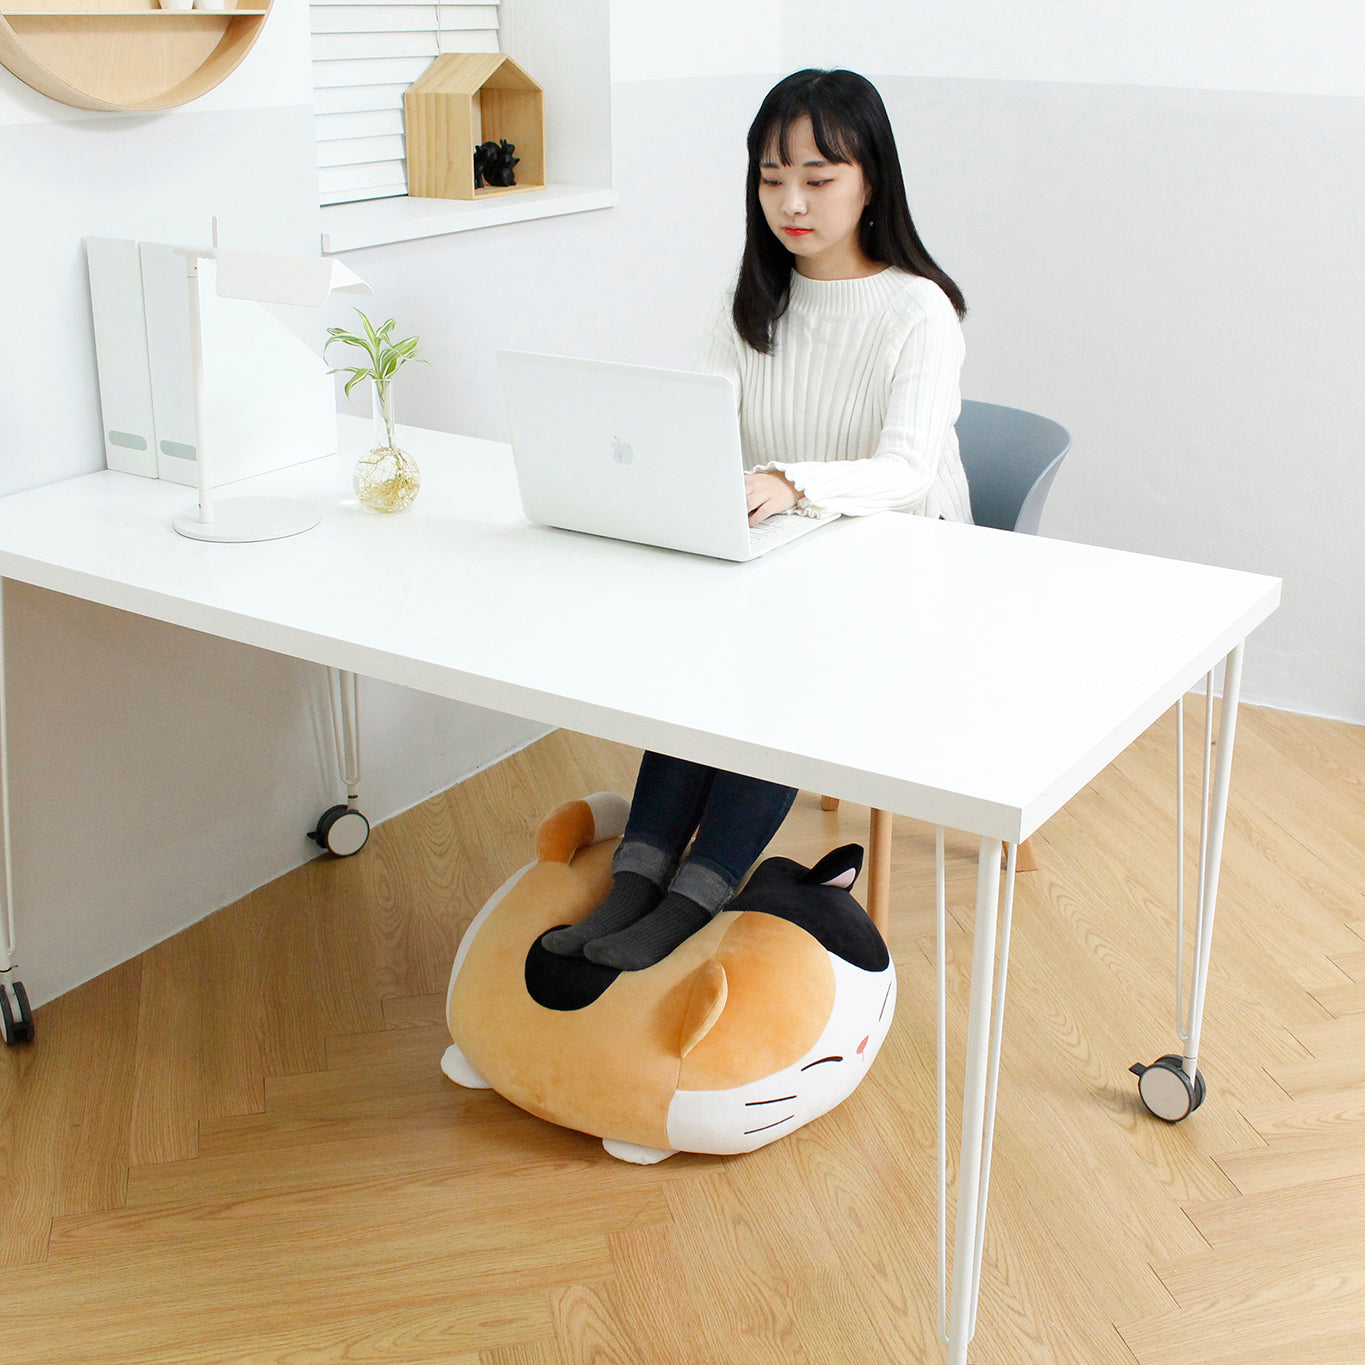 Model sits at desk using their laptop with their feet propped up on Camang pillow.